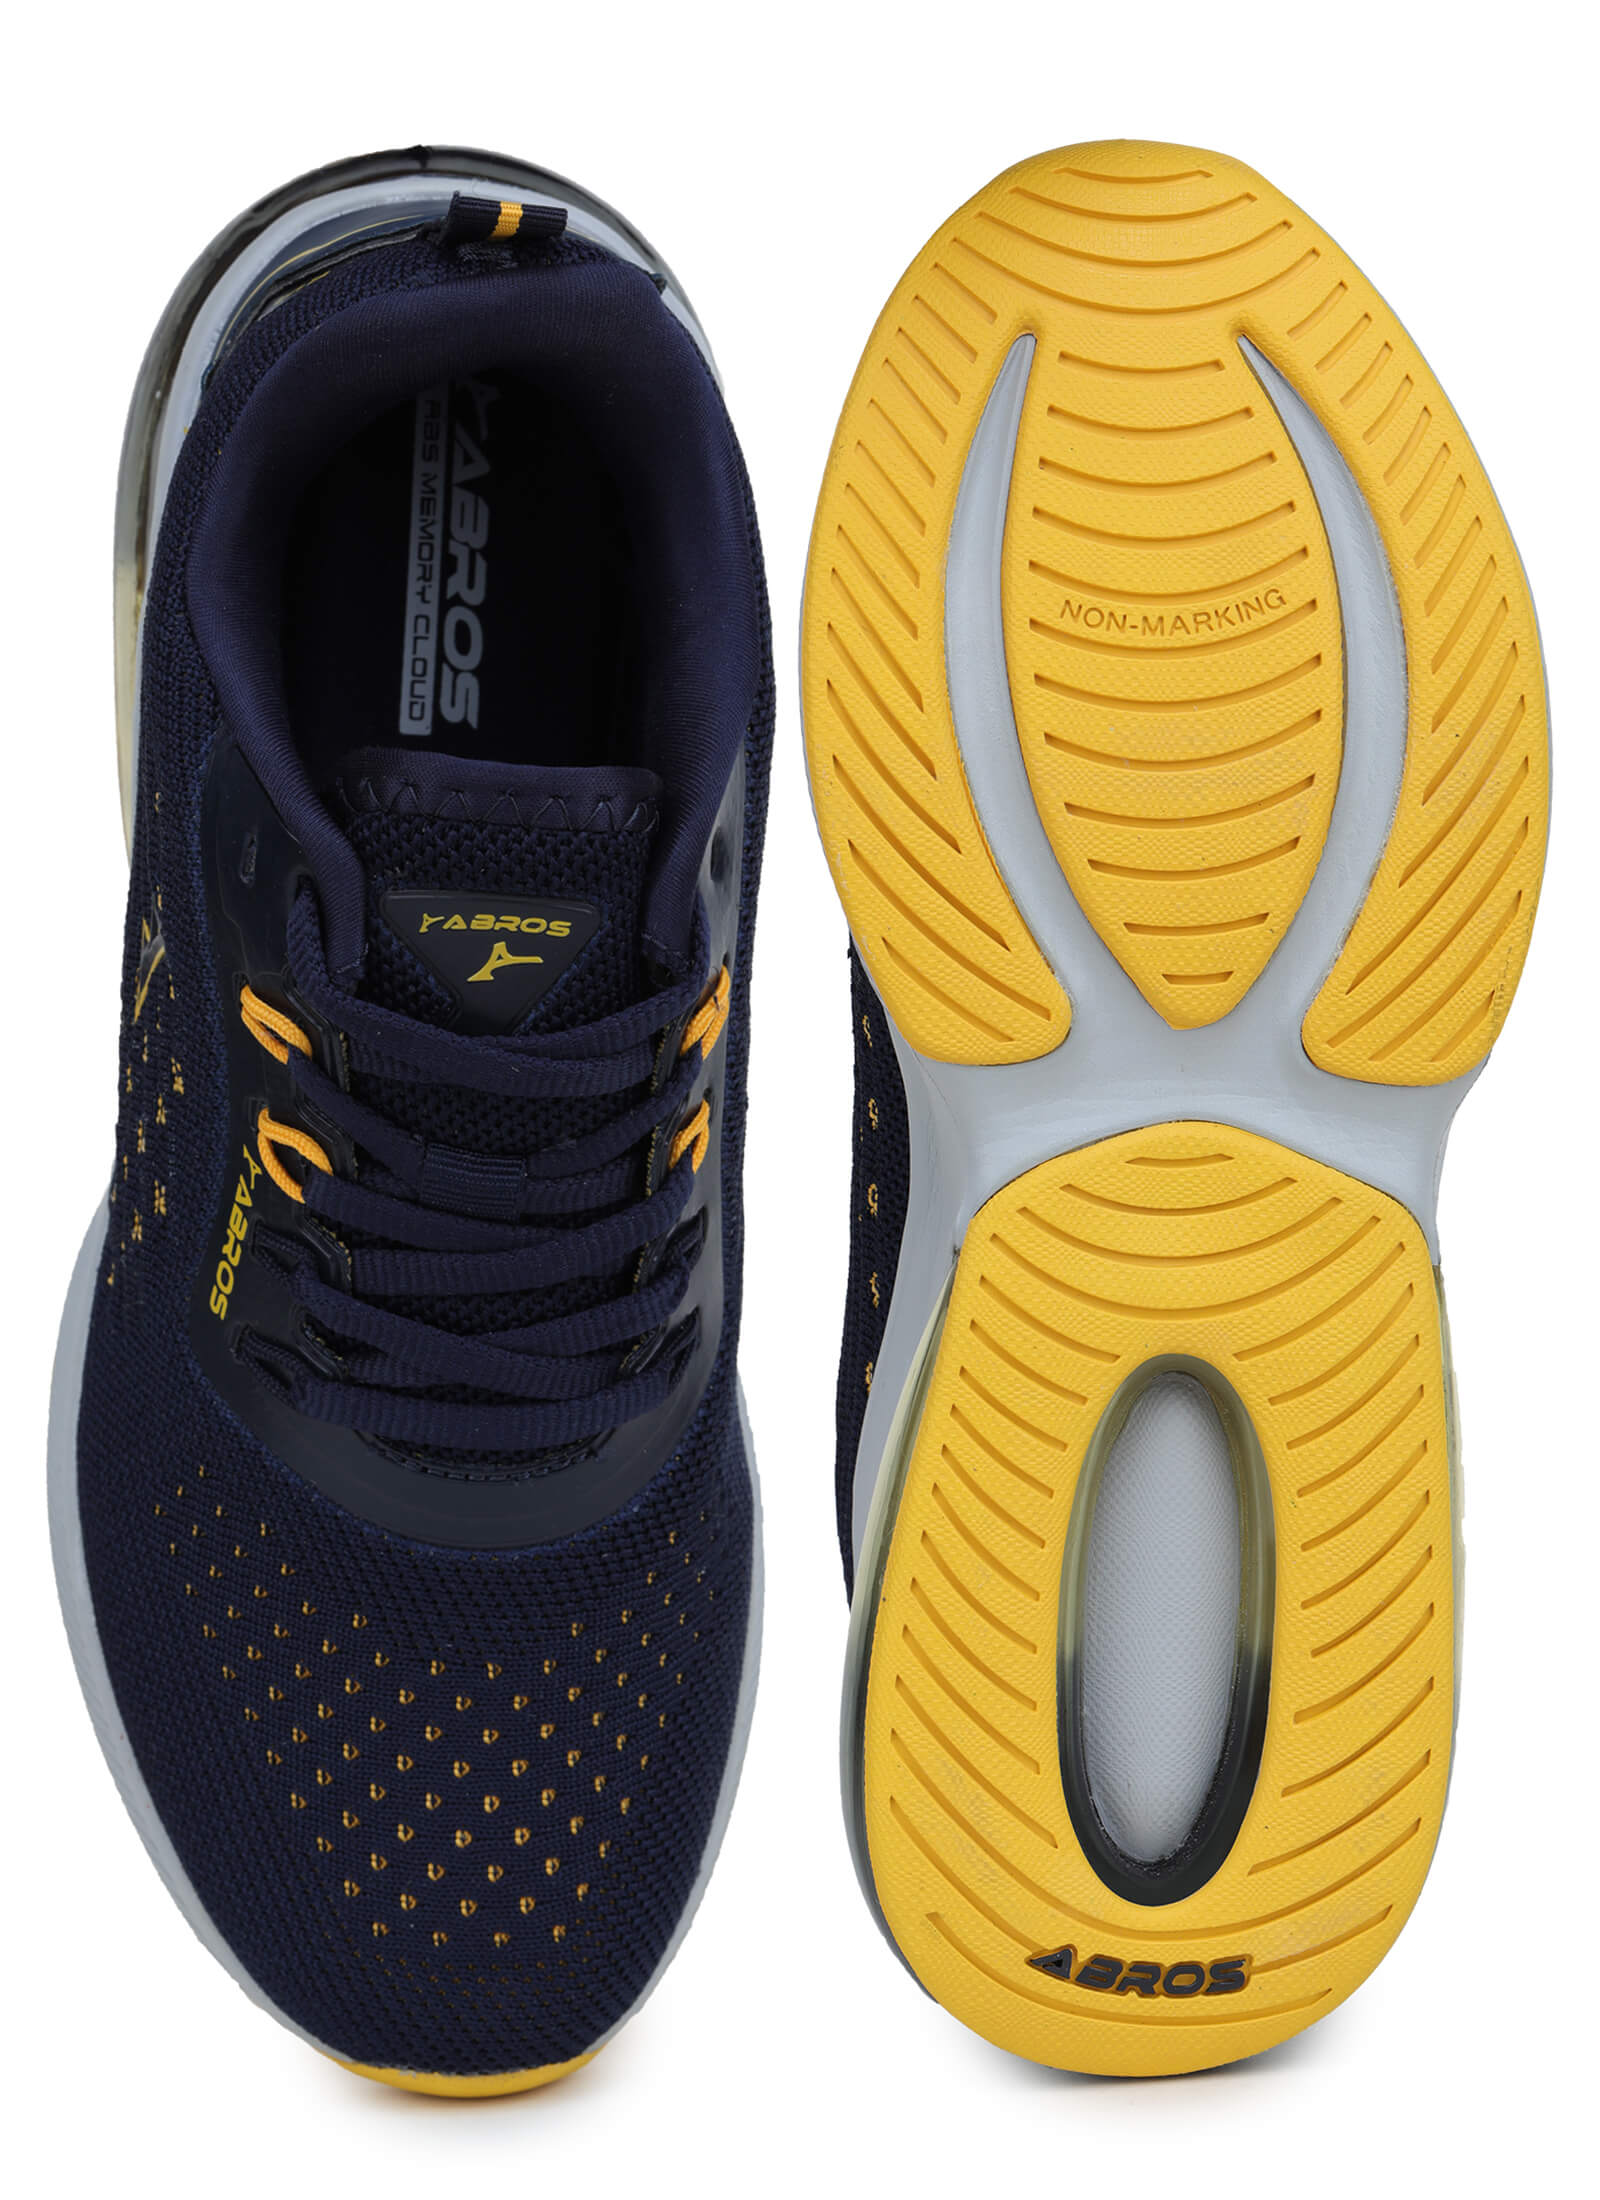 Bairstow-5 Anti-Skid Sports Shoes For Men